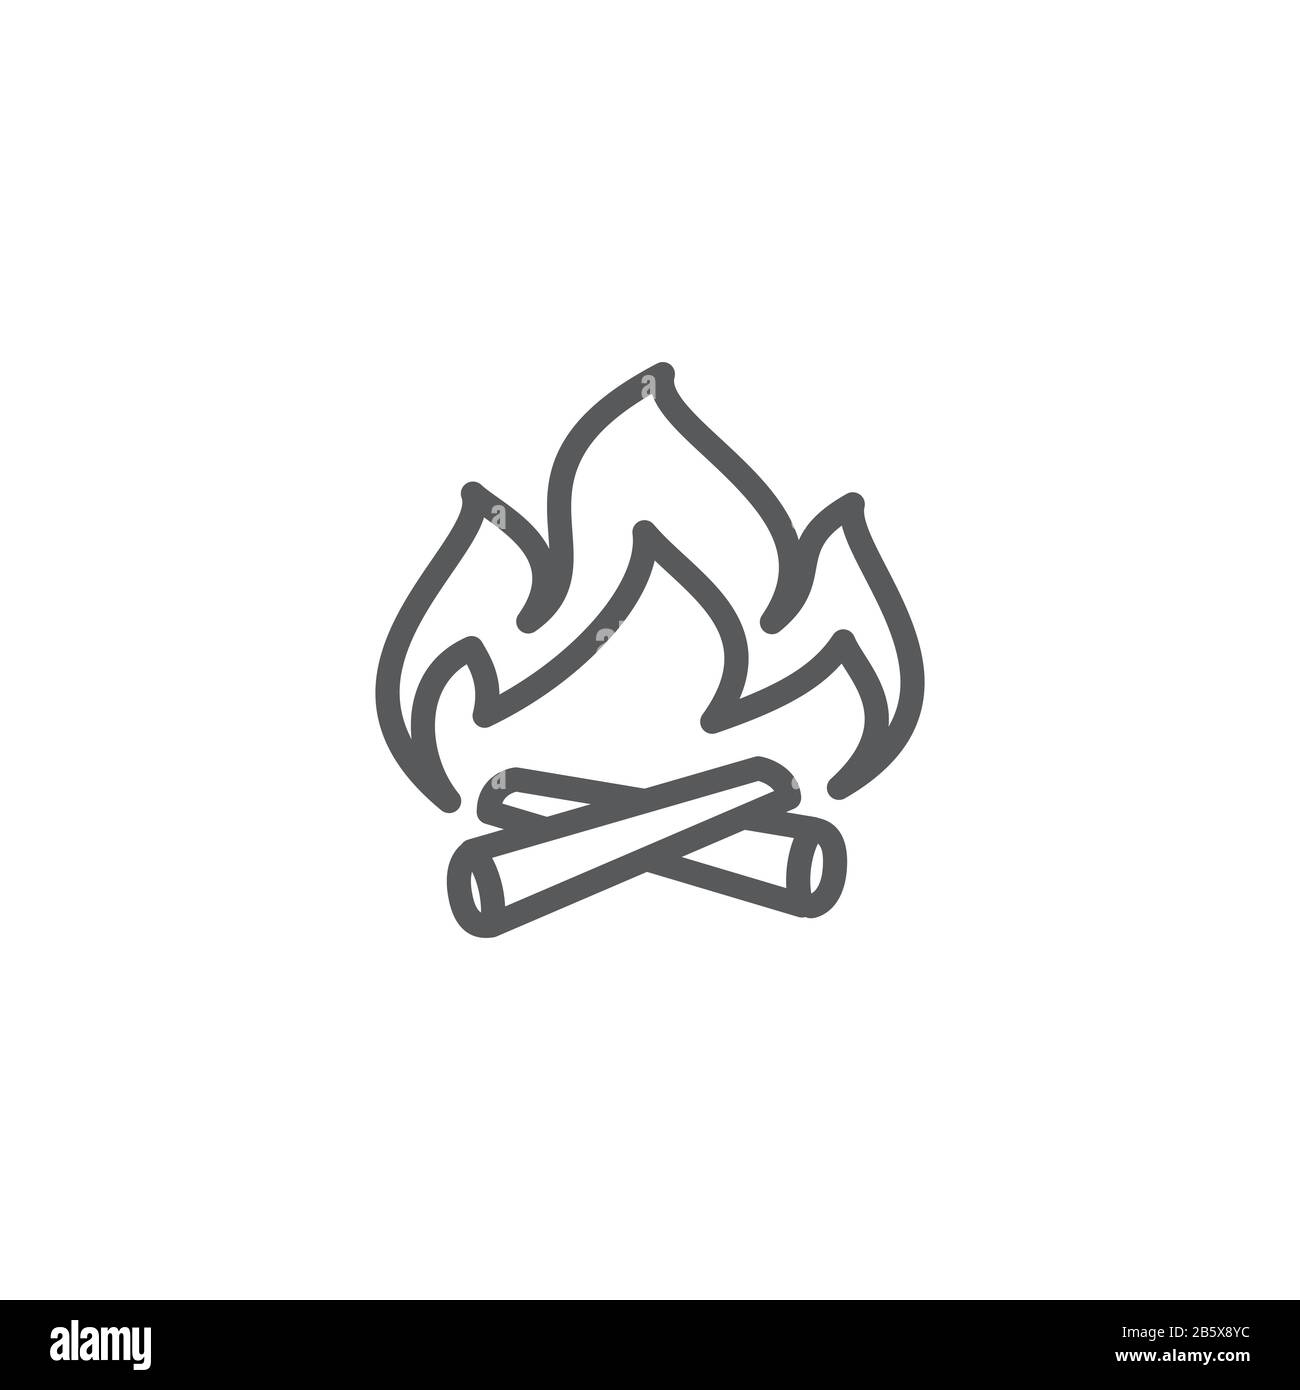 Campfire line icon on white background Stock Vector